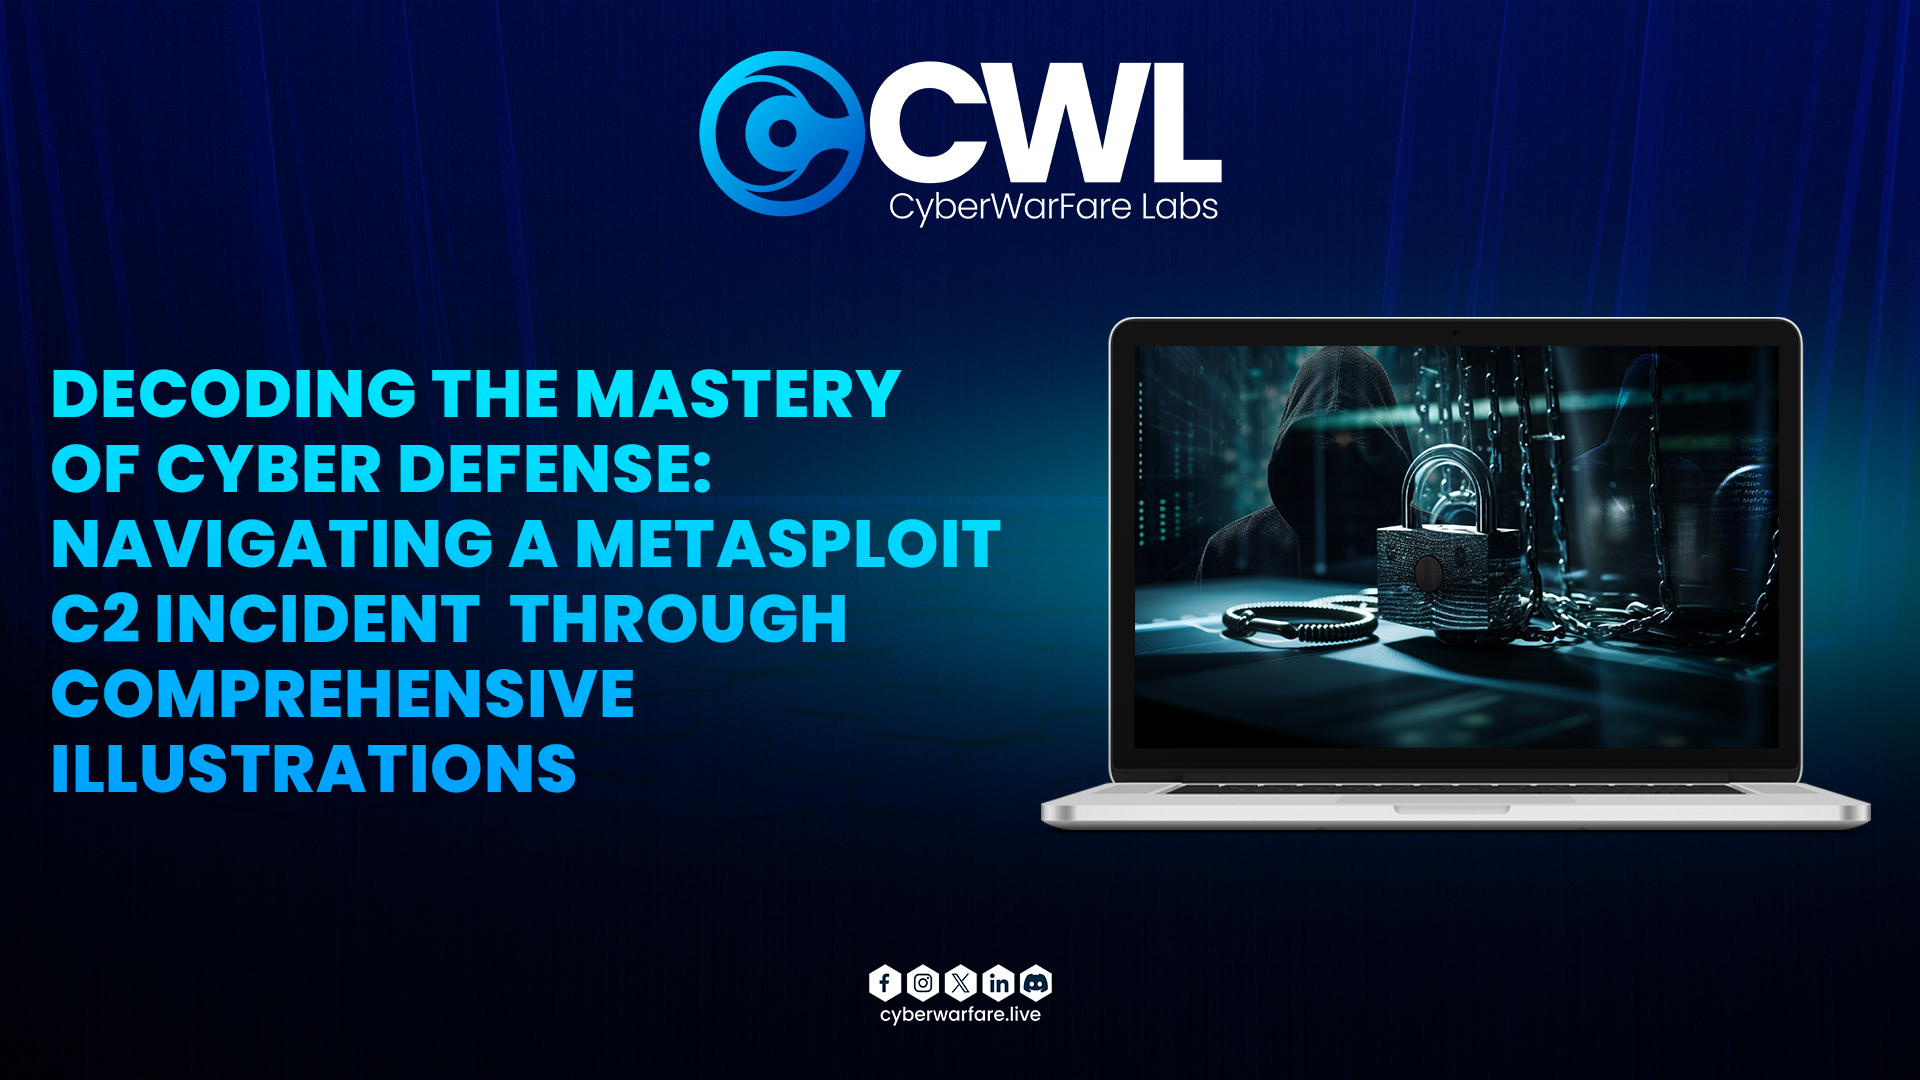 Decoding the Mastery of Cyber Defense: Navigating a Metasploit C2 Incident  through Comprehensive Illustrations